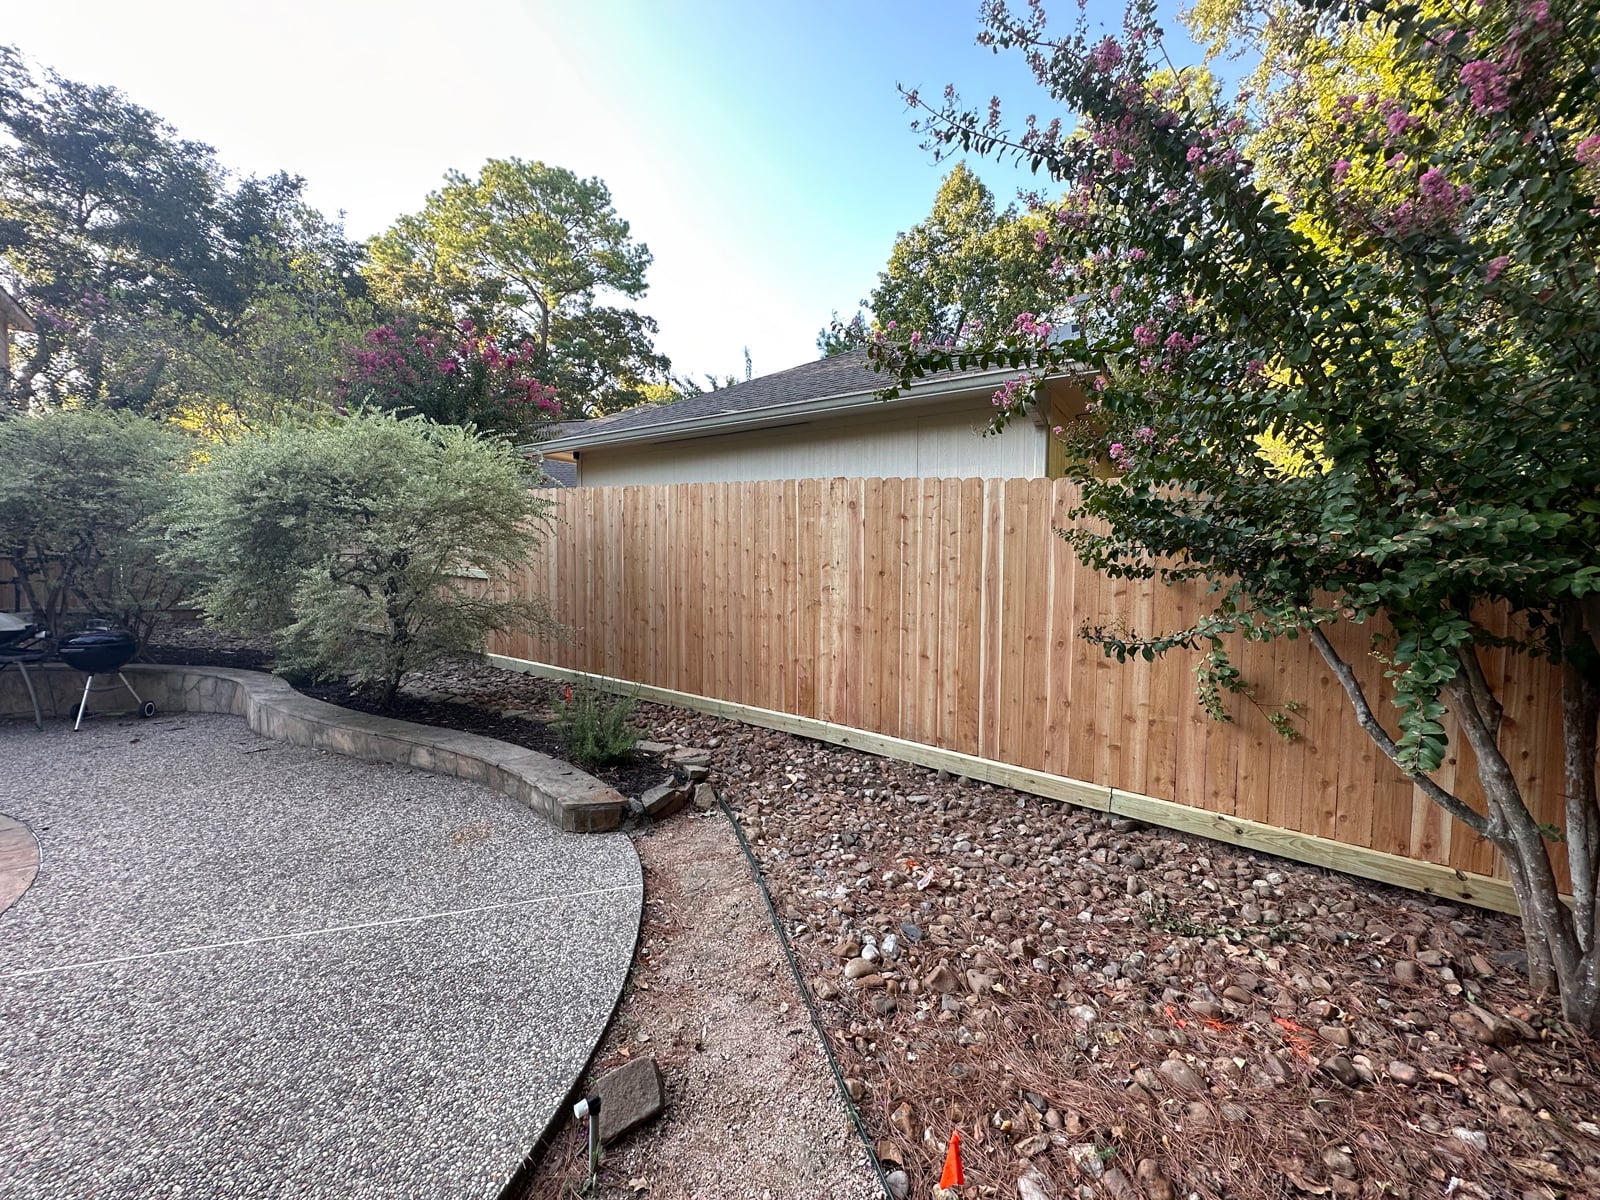 Fence Installation & Repair in The Woodlands Texas